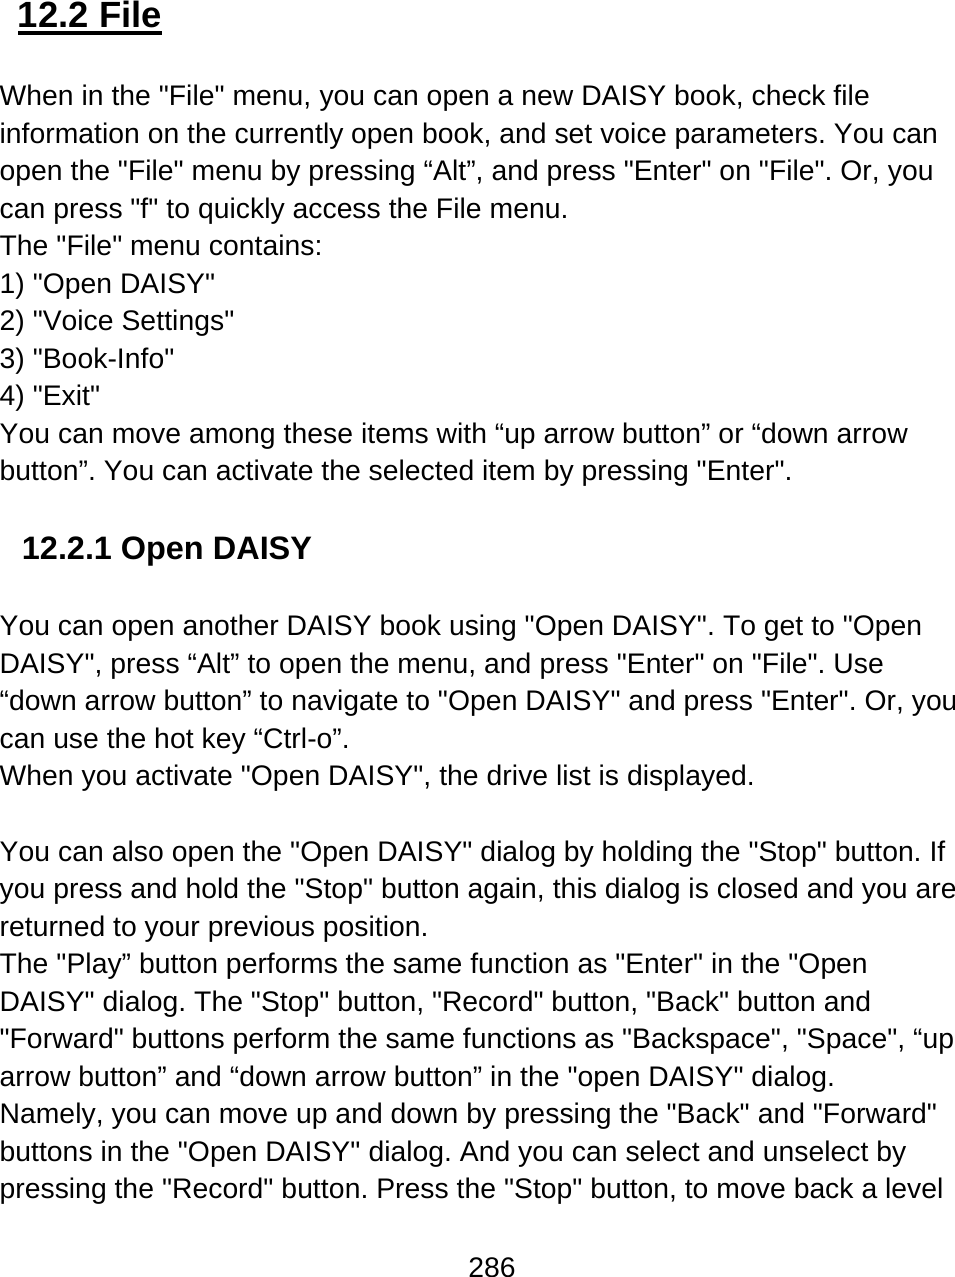 286   12.2 File  When in the &quot;File&quot; menu, you can open a new DAISY book, check file information on the currently open book, and set voice parameters. You can open the &quot;File&quot; menu by pressing “Alt”, and press &quot;Enter&quot; on &quot;File&quot;. Or, you can press &quot;f&quot; to quickly access the File menu.  The &quot;File&quot; menu contains:  1) &quot;Open DAISY&quot;  2) &quot;Voice Settings&quot;  3) &quot;Book-Info&quot; 4) &quot;Exit&quot;  You can move among these items with “up arrow button” or “down arrow button”. You can activate the selected item by pressing &quot;Enter&quot;.  12.2.1 Open DAISY  You can open another DAISY book using &quot;Open DAISY&quot;. To get to &quot;Open DAISY&quot;, press “Alt” to open the menu, and press &quot;Enter&quot; on &quot;File&quot;. Use “down arrow button” to navigate to &quot;Open DAISY&quot; and press &quot;Enter&quot;. Or, you can use the hot key “Ctrl-o”.  When you activate &quot;Open DAISY&quot;, the drive list is displayed.  You can also open the &quot;Open DAISY&quot; dialog by holding the &quot;Stop&quot; button. If you press and hold the &quot;Stop&quot; button again, this dialog is closed and you are returned to your previous position. The &quot;Play” button performs the same function as &quot;Enter&quot; in the &quot;Open DAISY&quot; dialog. The &quot;Stop&quot; button, &quot;Record&quot; button, &quot;Back&quot; button and &quot;Forward&quot; buttons perform the same functions as &quot;Backspace&quot;, &quot;Space&quot;, “up arrow button” and “down arrow button” in the &quot;open DAISY&quot; dialog. Namely, you can move up and down by pressing the &quot;Back&quot; and &quot;Forward&quot; buttons in the &quot;Open DAISY&quot; dialog. And you can select and unselect by pressing the &quot;Record&quot; button. Press the &quot;Stop&quot; button, to move back a level 